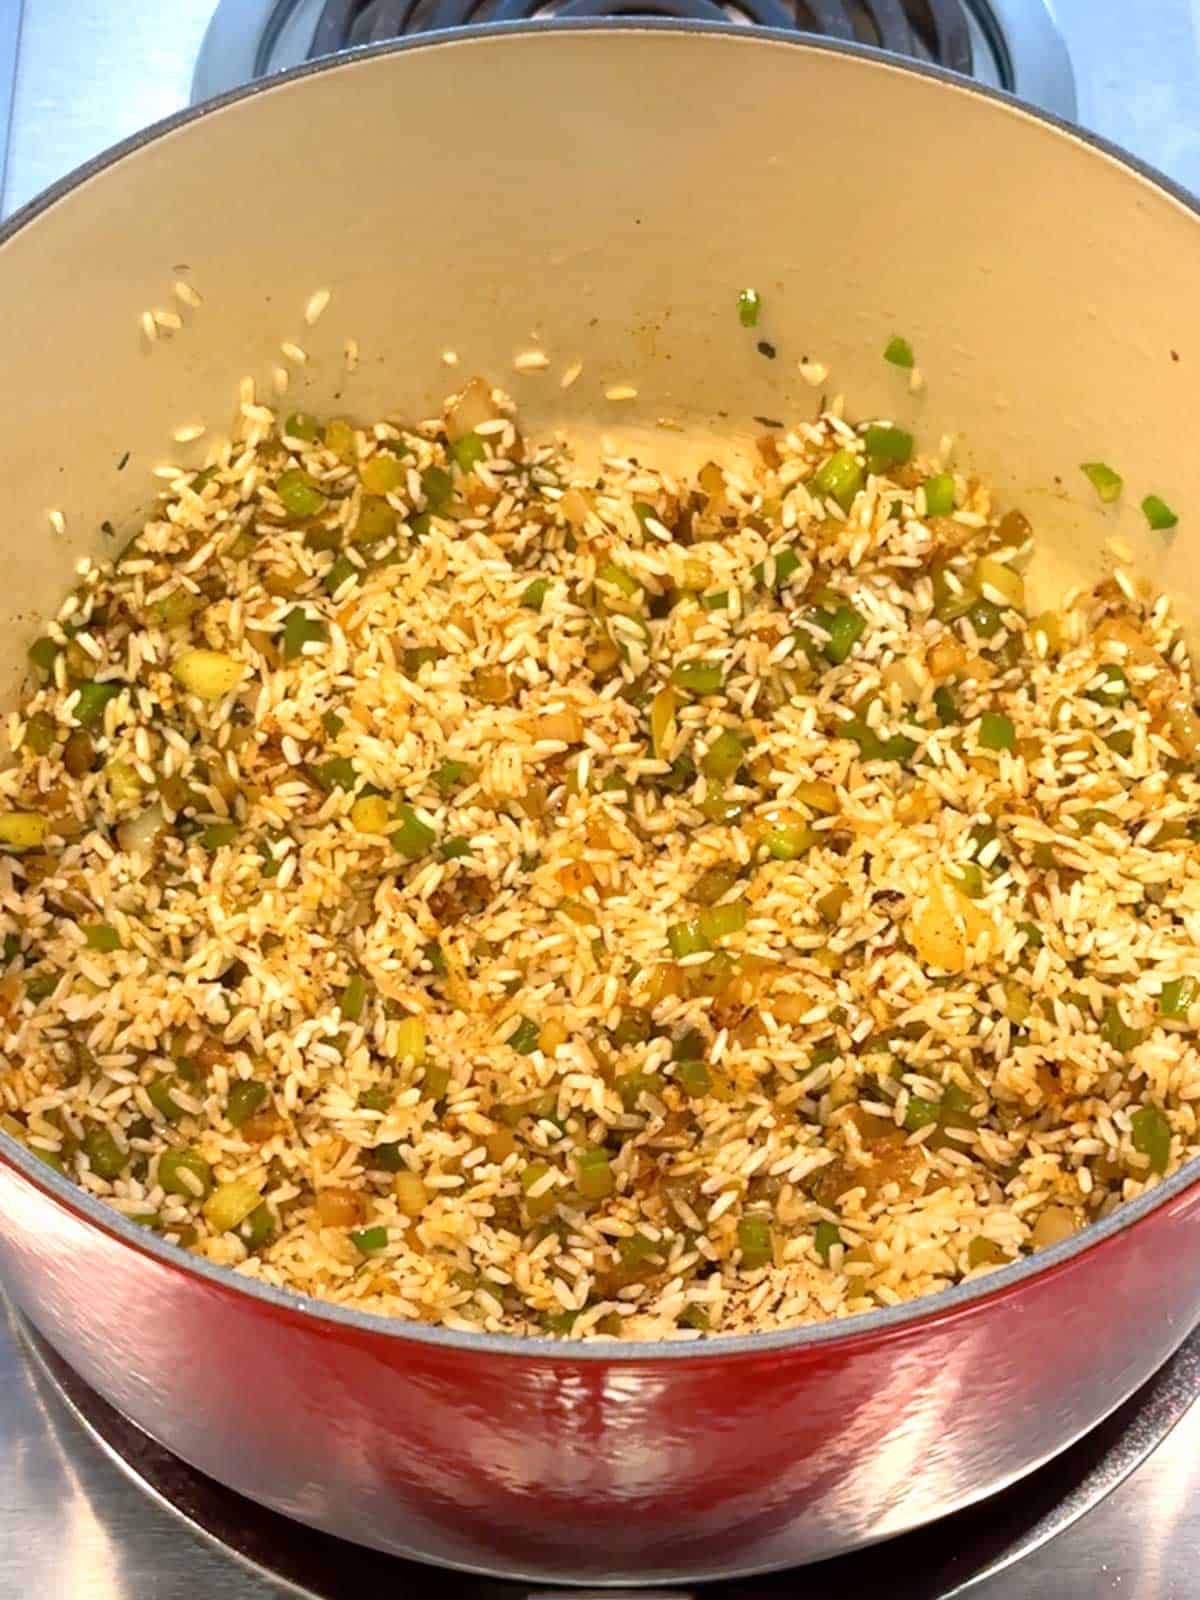 Rice added to Dutch oven with vegetables and spices.